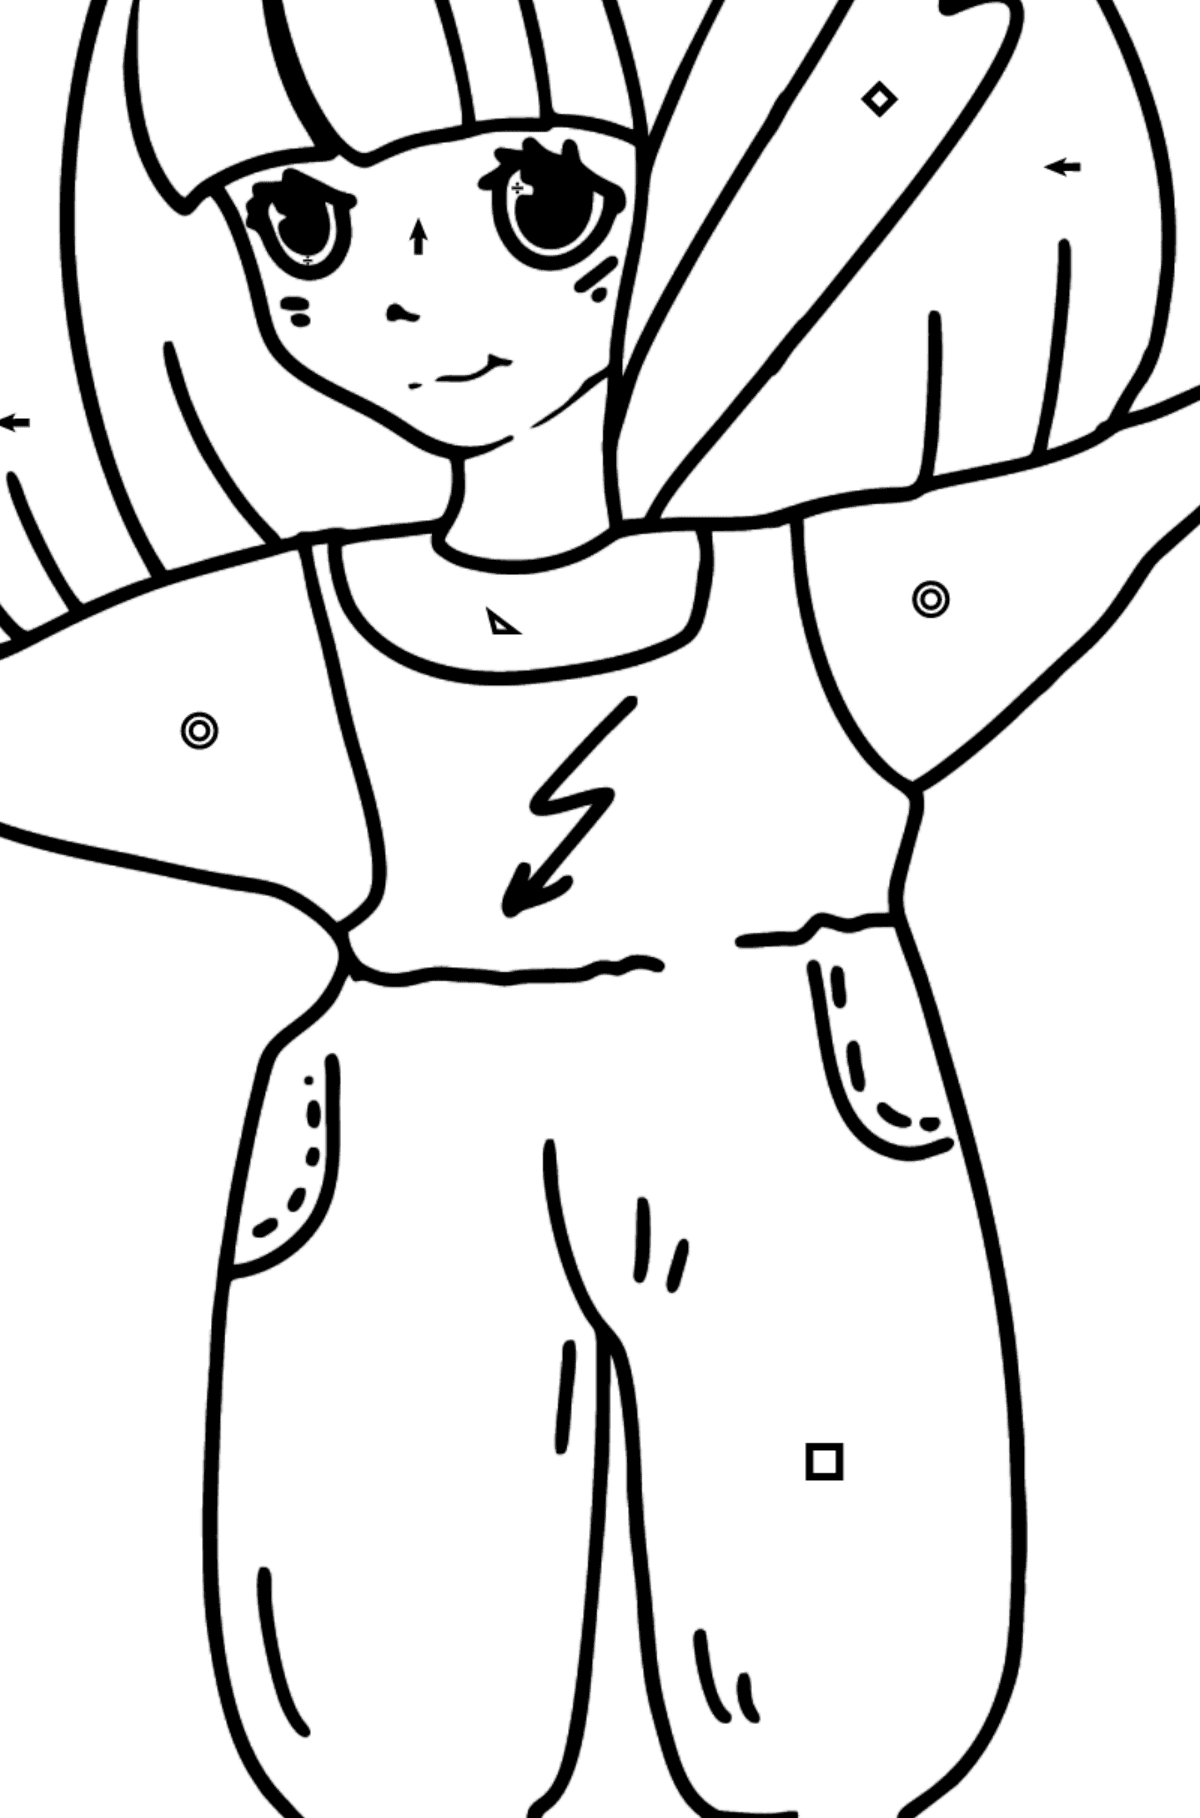 Thunder Anime Girl Coloring Pages - Coloring by Symbols and Geometric Shapes for Kids